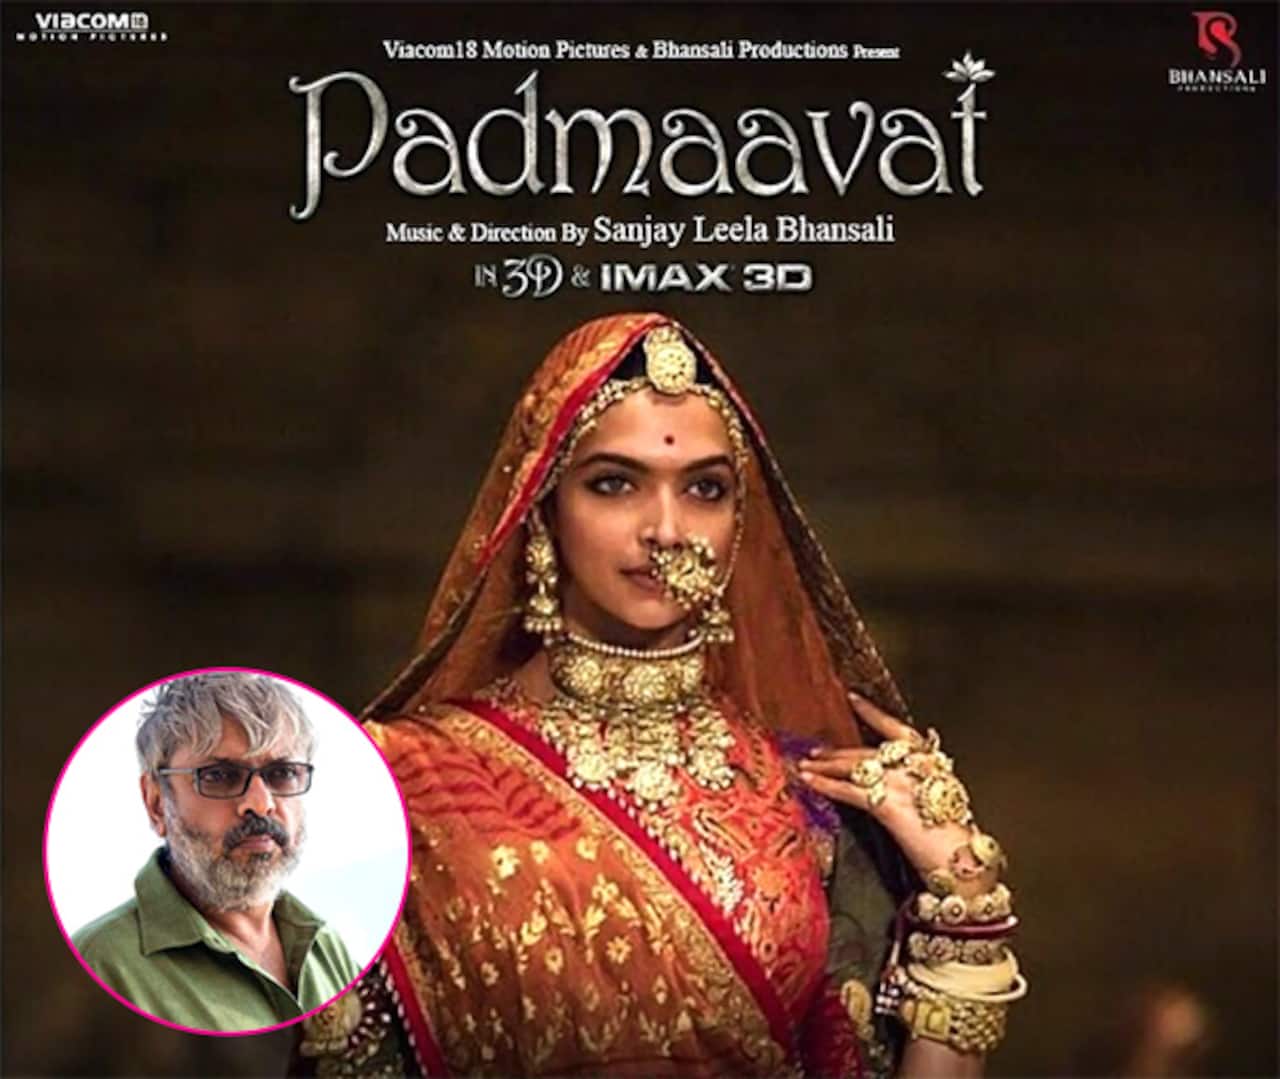 Padmaavat Box Office Collection Sanjay Leela Bhansali Gets His Biggest Day 1 Grosser With This